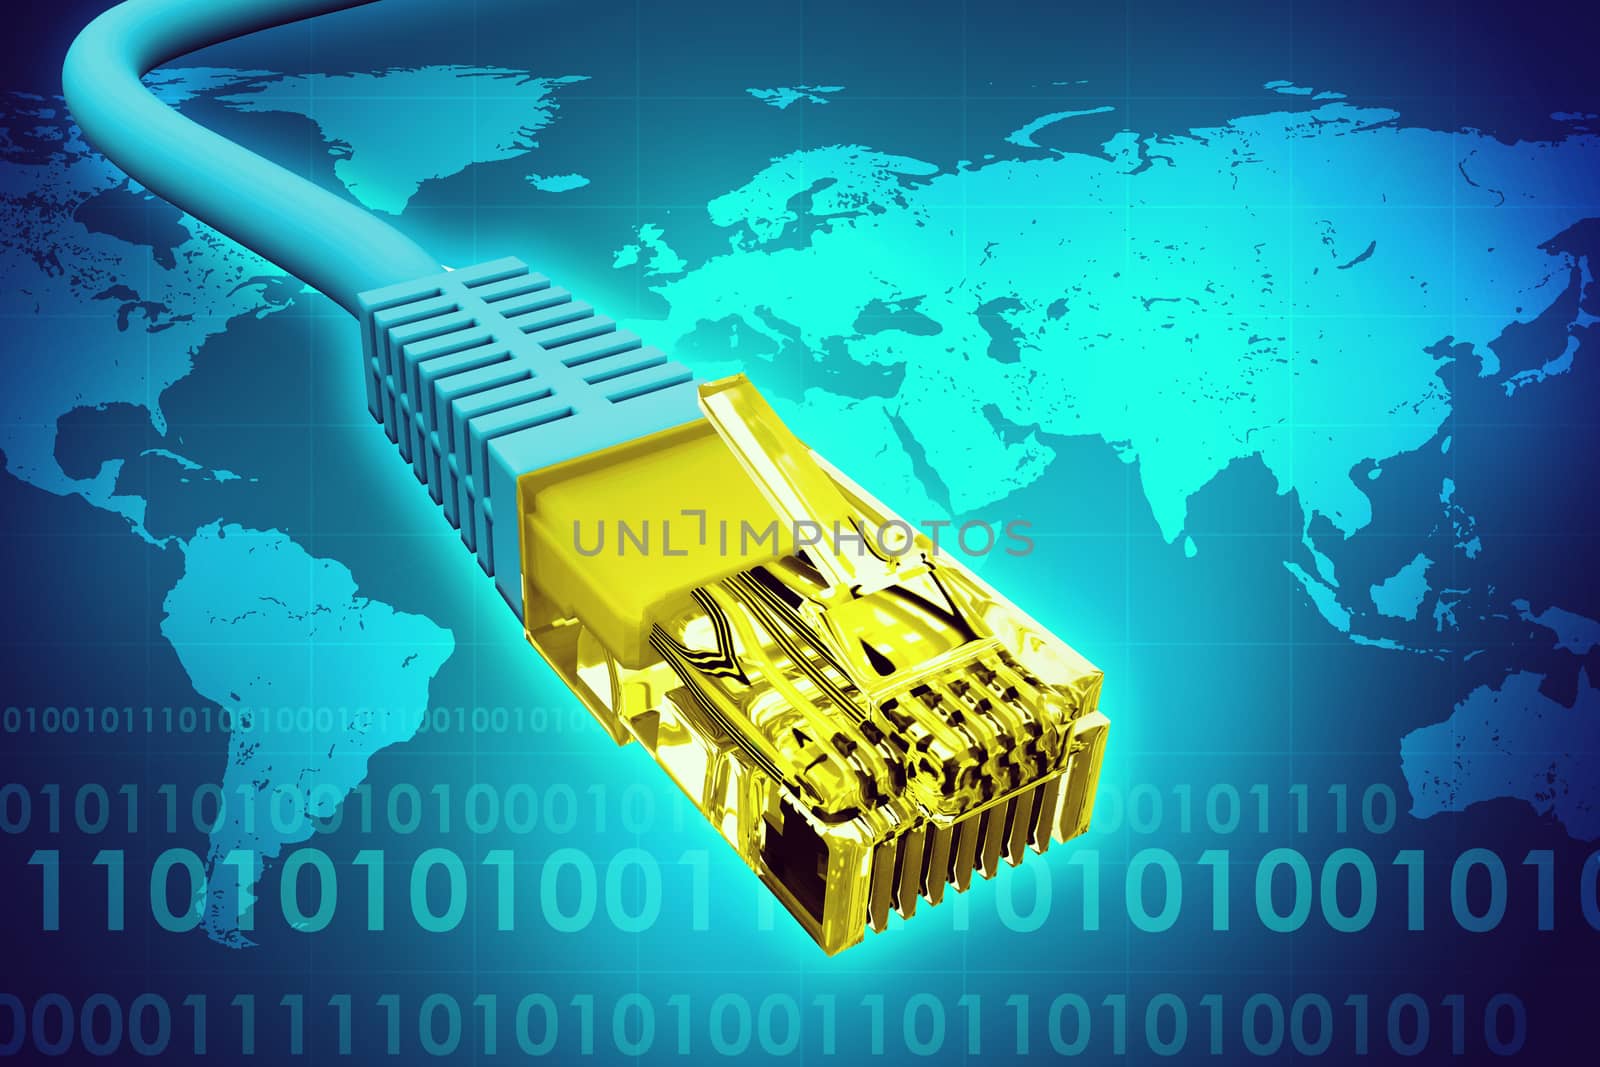 Golden computer cable on abstract blue background with world map